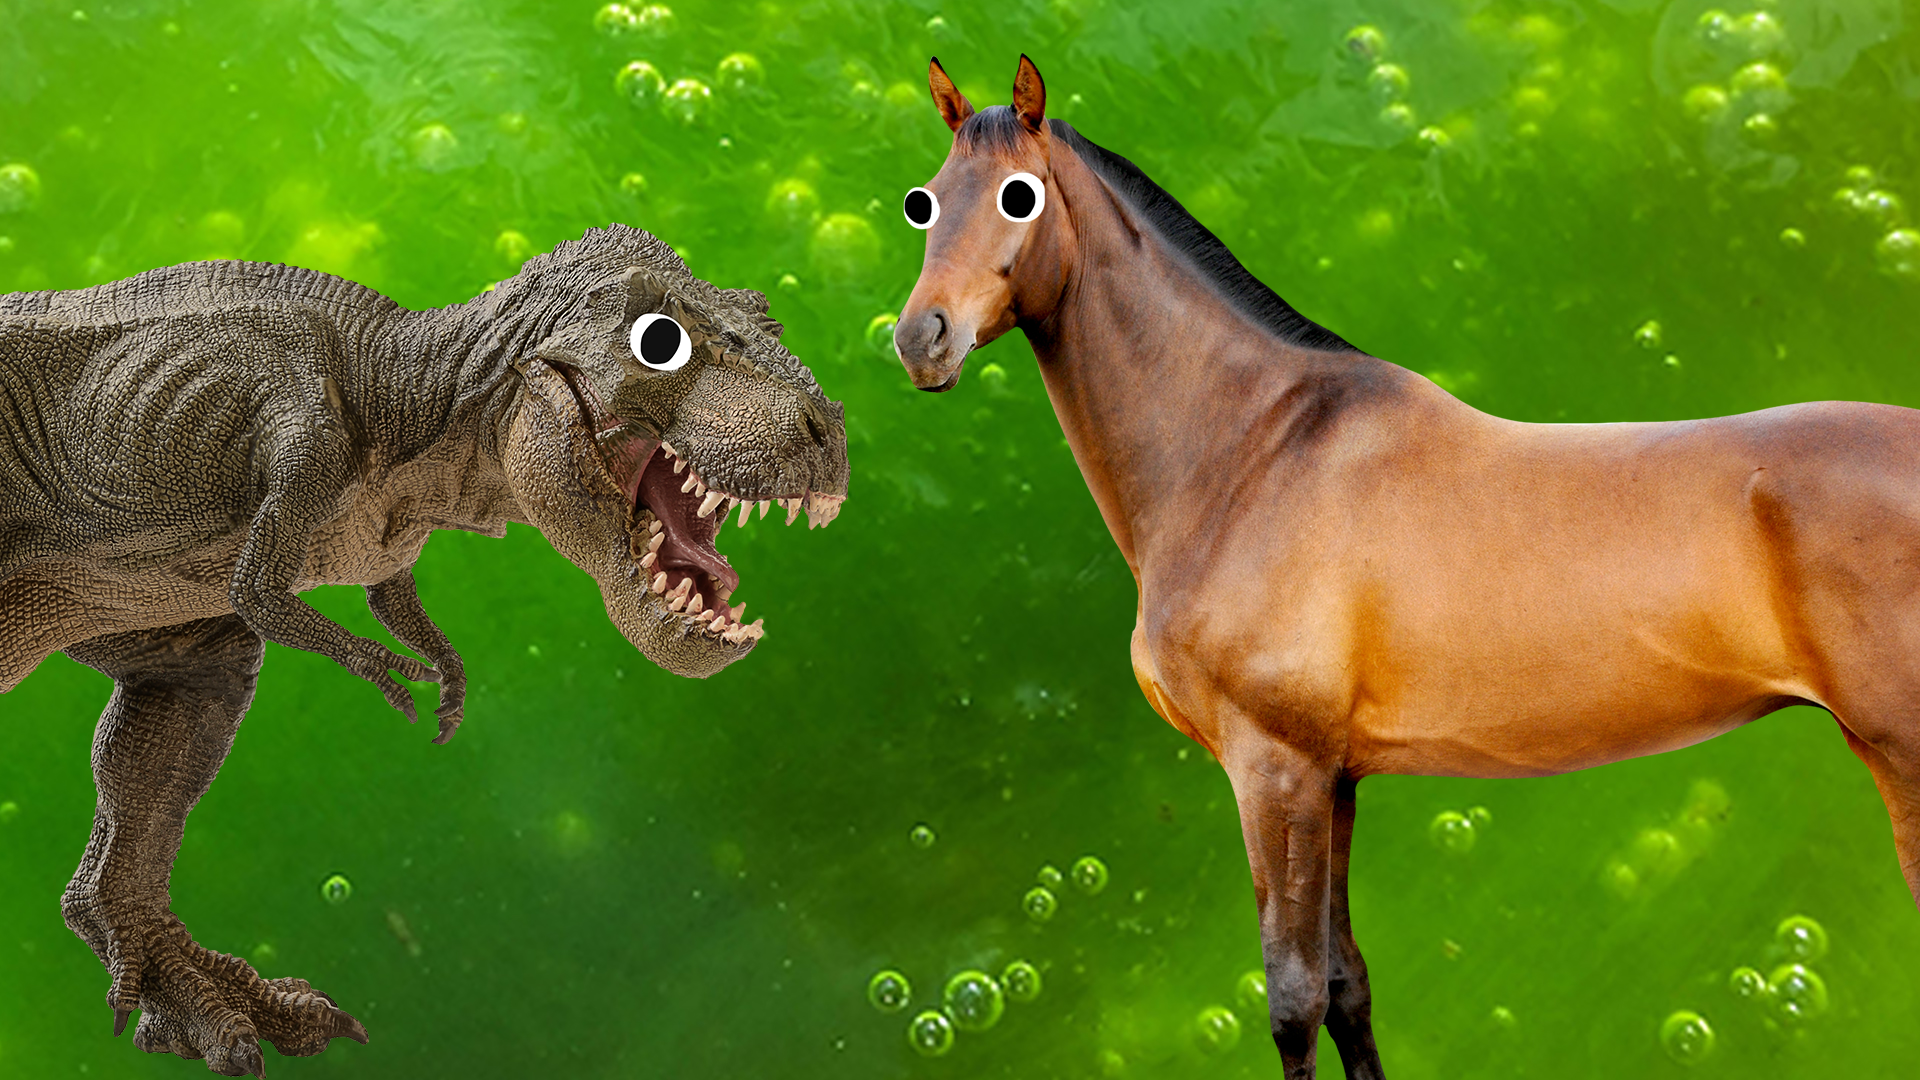 Horse and dinosaur on slime background